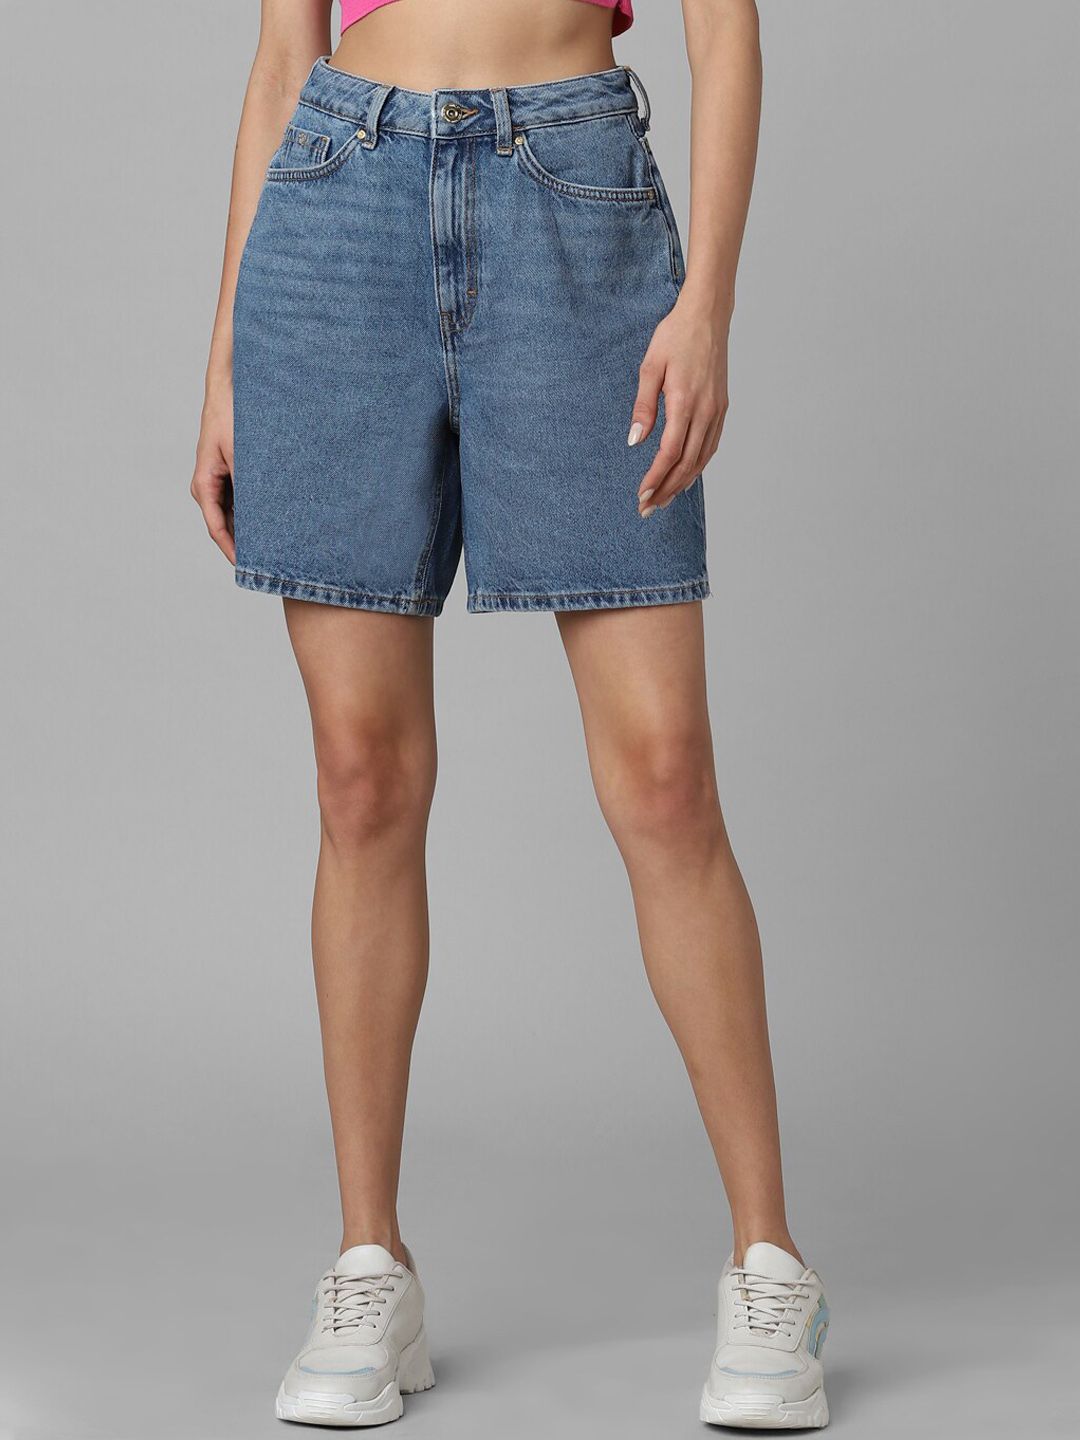 ONLY Women Blue High-Rise Cotton Denim Shorts Price in India